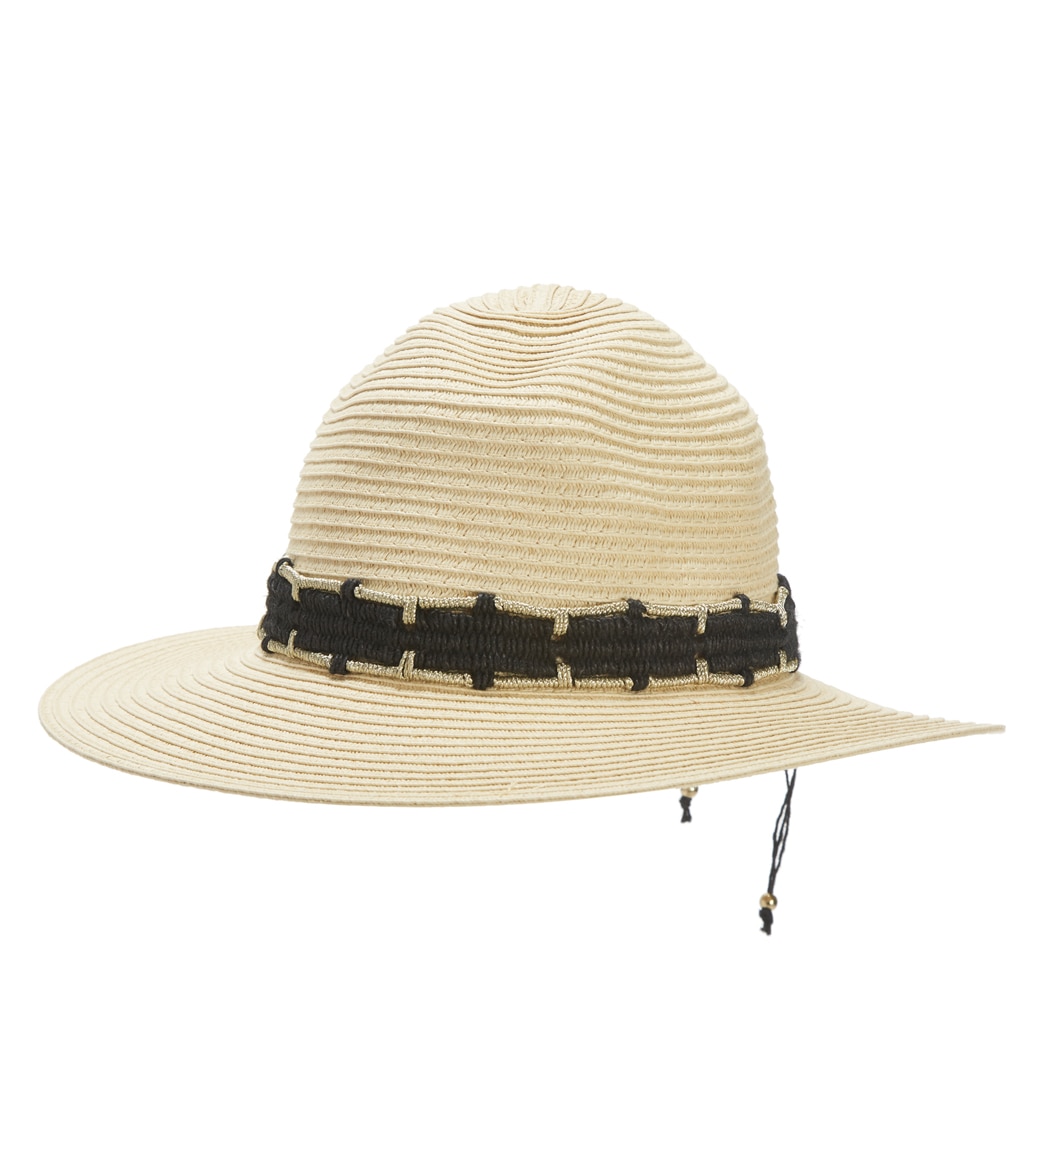 Physician Endorsed Women's Cleo Straw Hat - Sand One Size - Swimoutlet.com